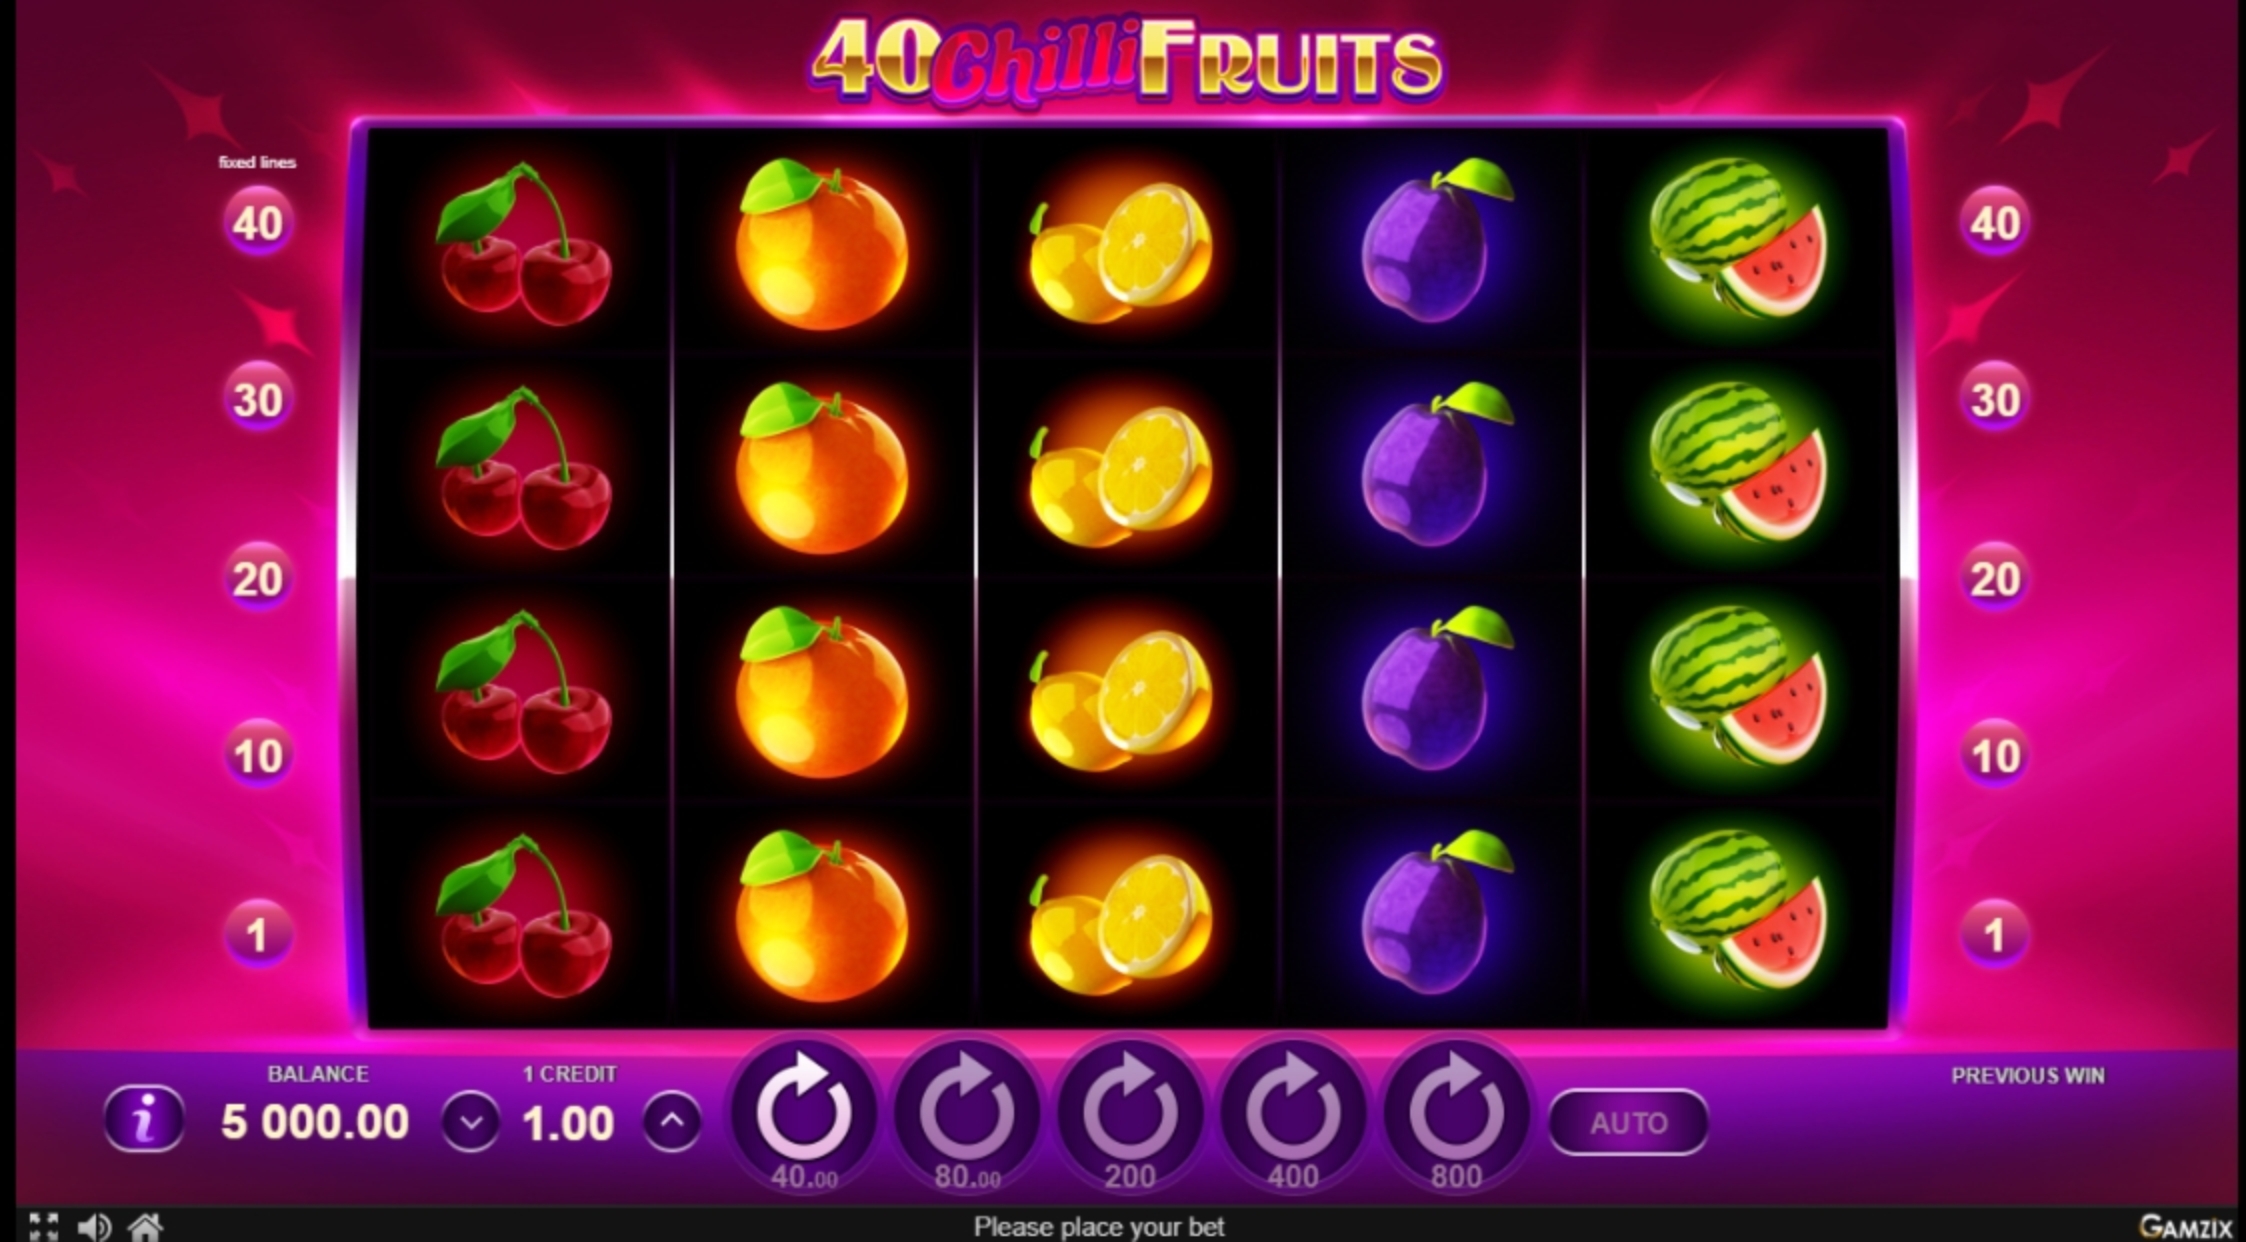 Reels in 40 Chilli Fruits Slot Game by Gamzix